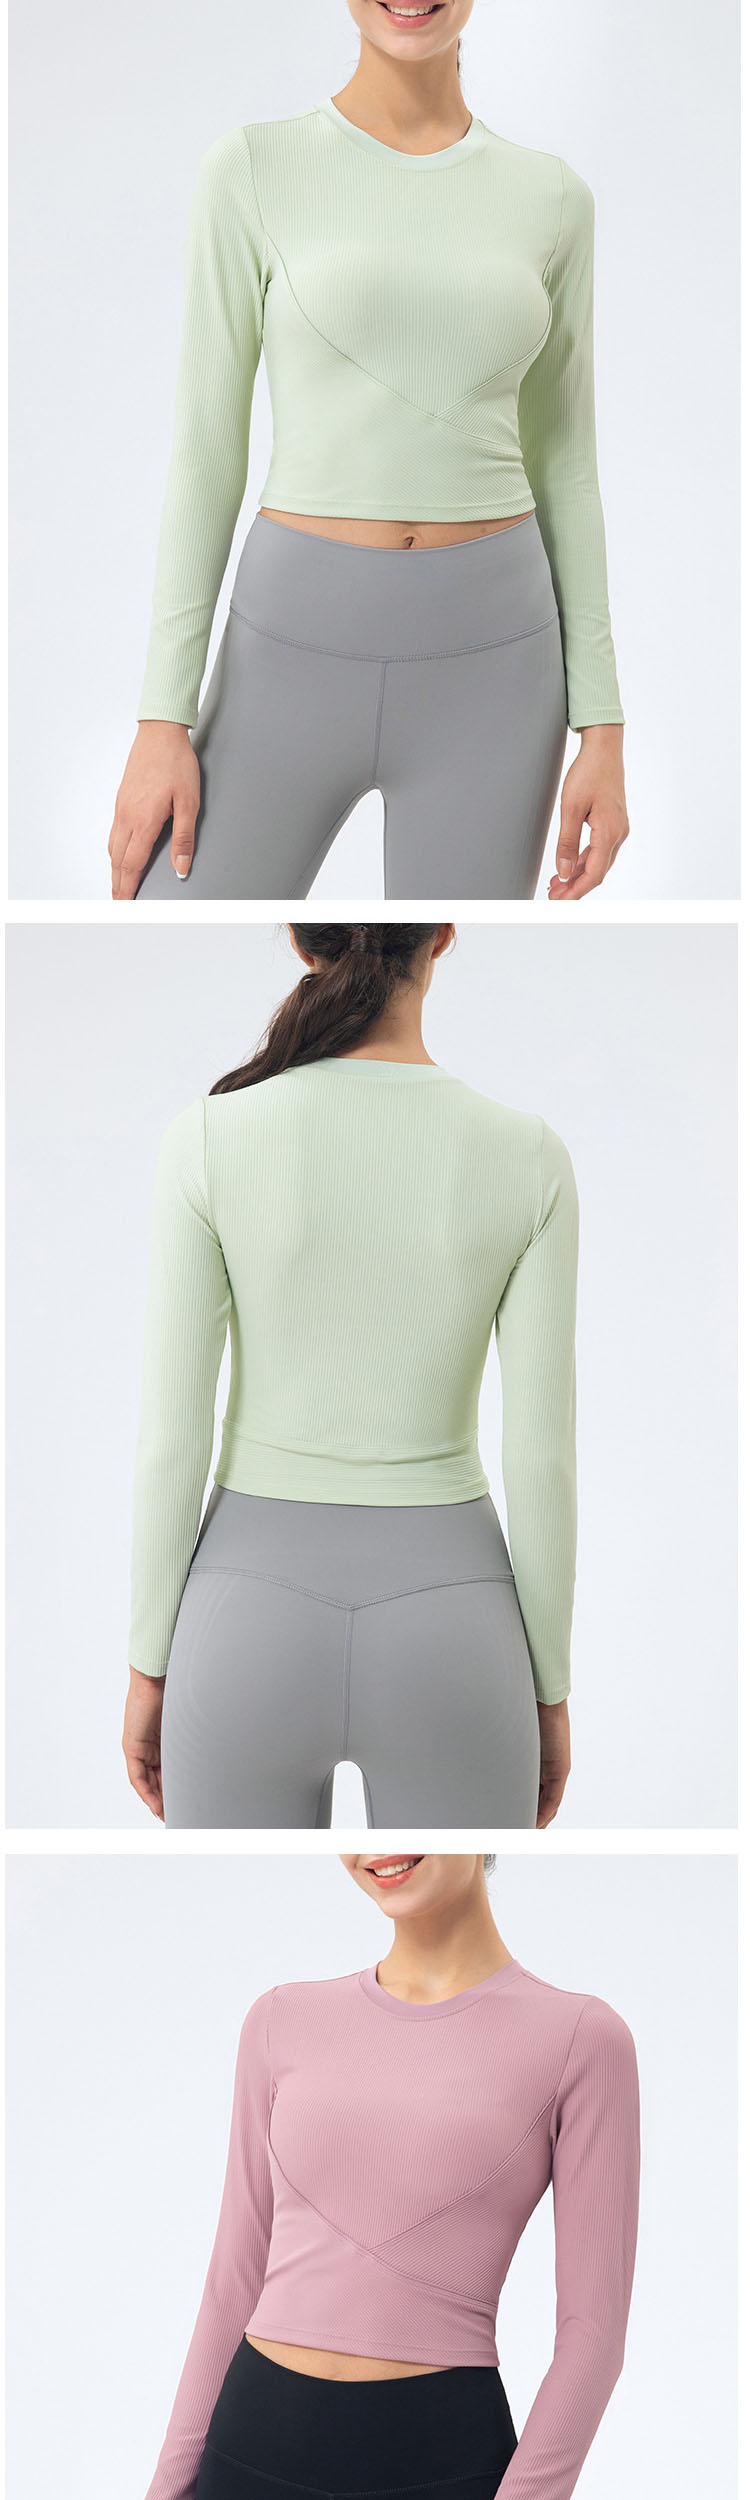 High-quality fabrics are used, which are breathable and sweat-absorbent, and exercise without burden.